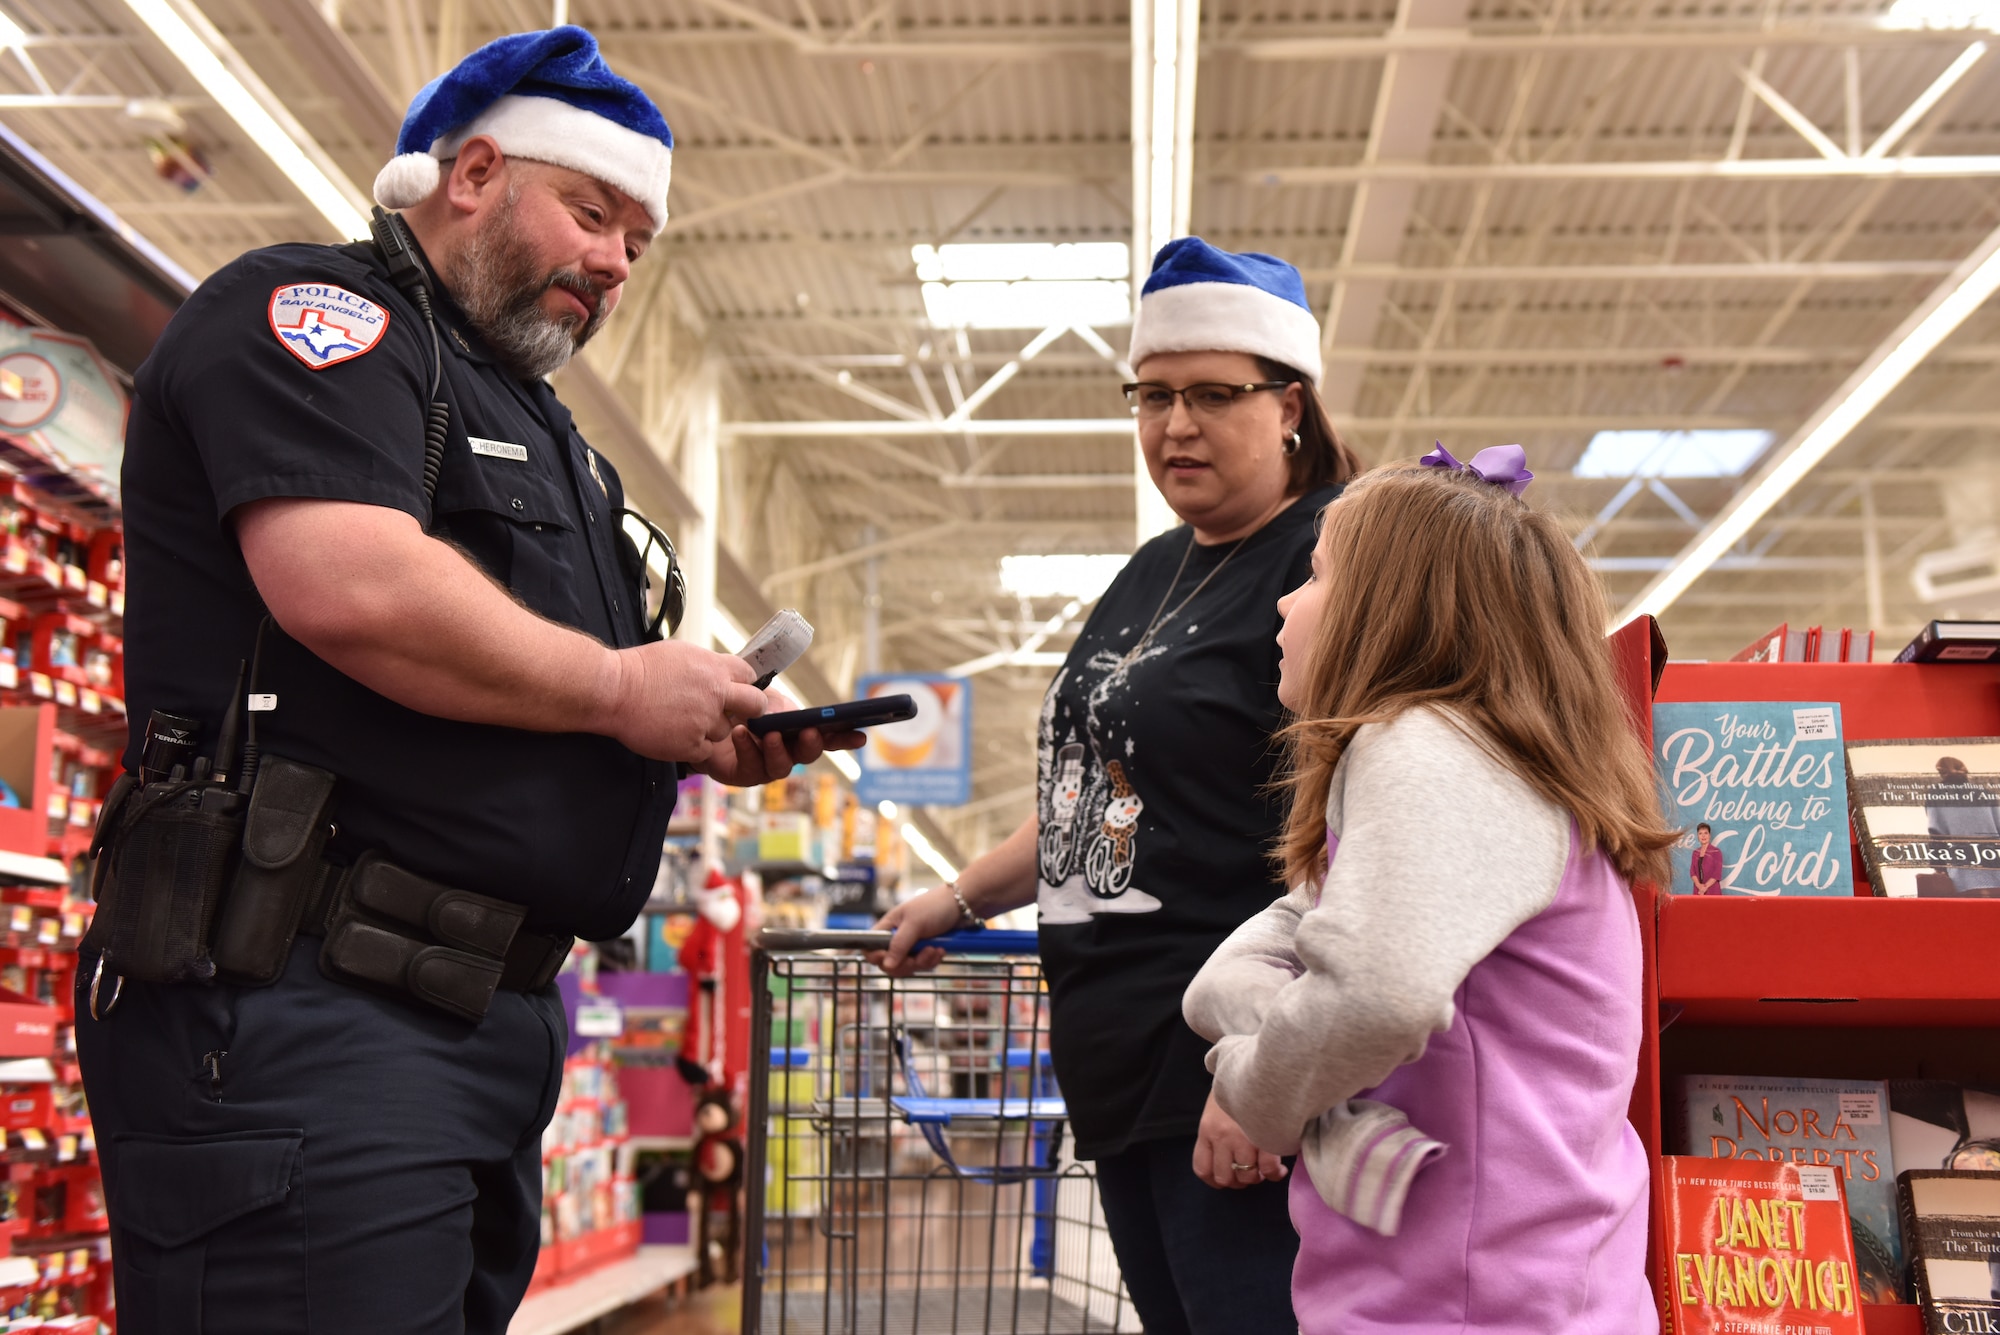 A San Angelo police officer talks with a child about their shopping list during the Operation Blue Santa Shop with a Cop event in San Angelo, Texas, Dec. 14, 2019. The children were able to pick out gifts for various family members and also themselves. (U.S. Air Force photo by Senior Airman Seraiah Wolf)